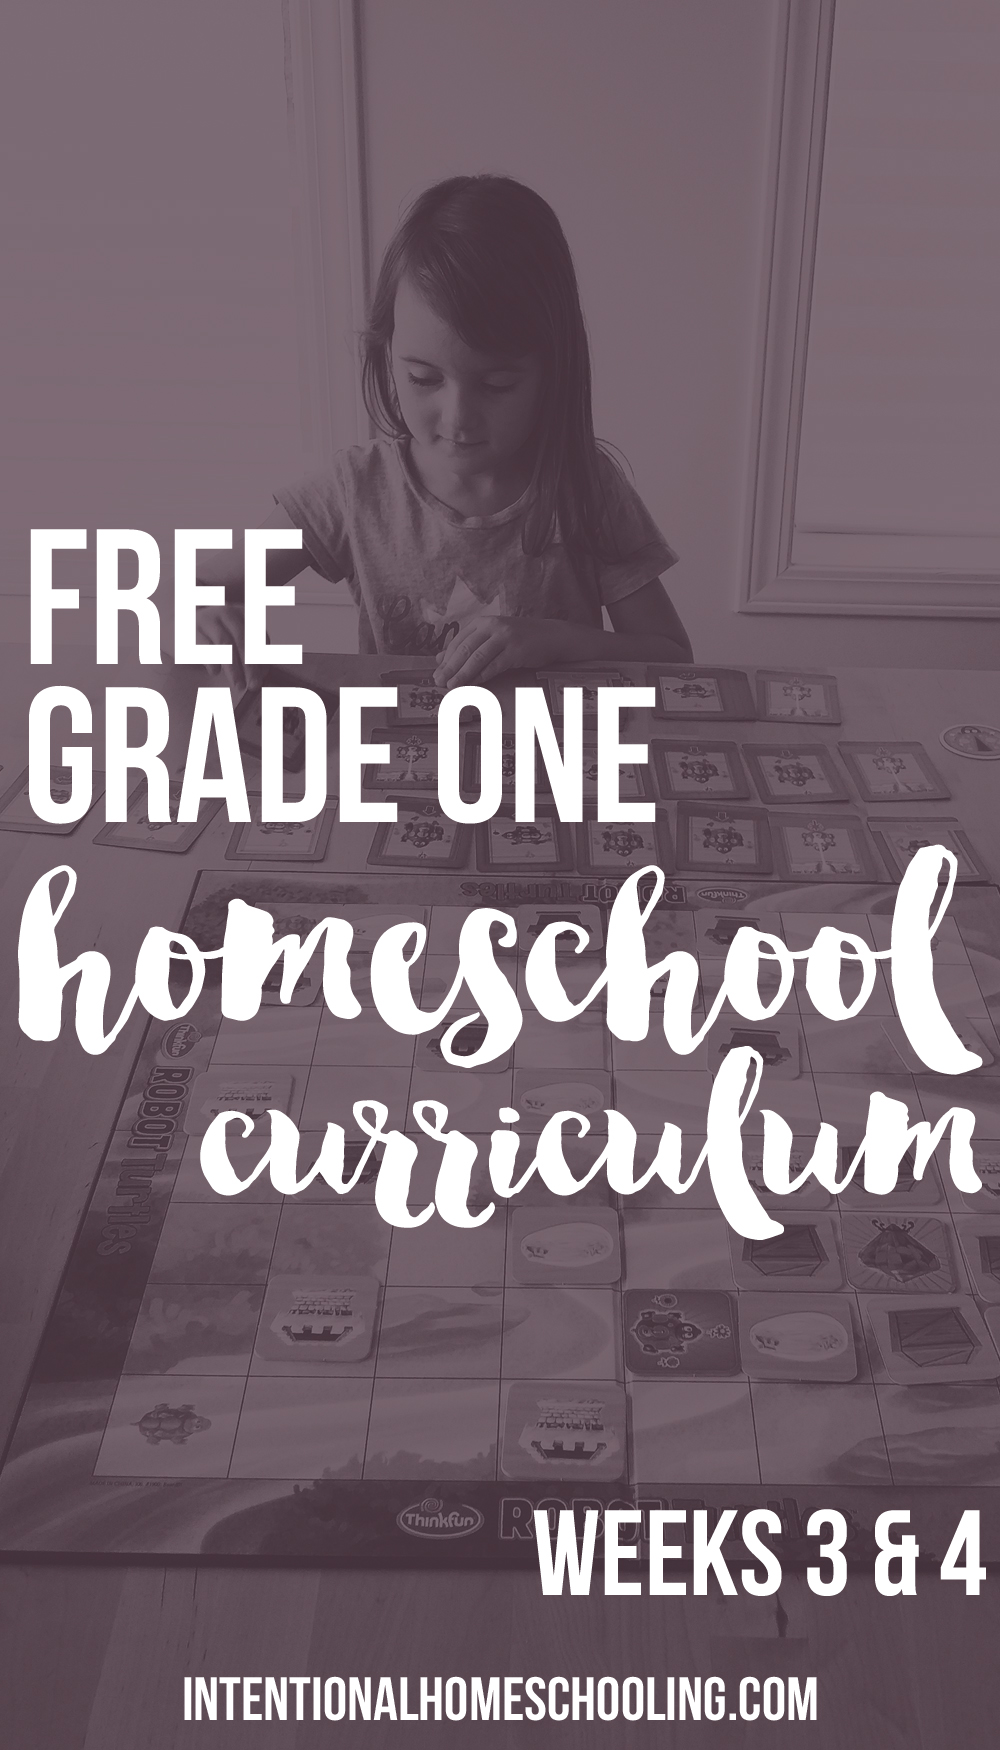 Our Homemade Grade One Homeschool Curriculum - Weeks 3 & 4 - includes Bible, writing, reading, math, science, history, geography, art and music!